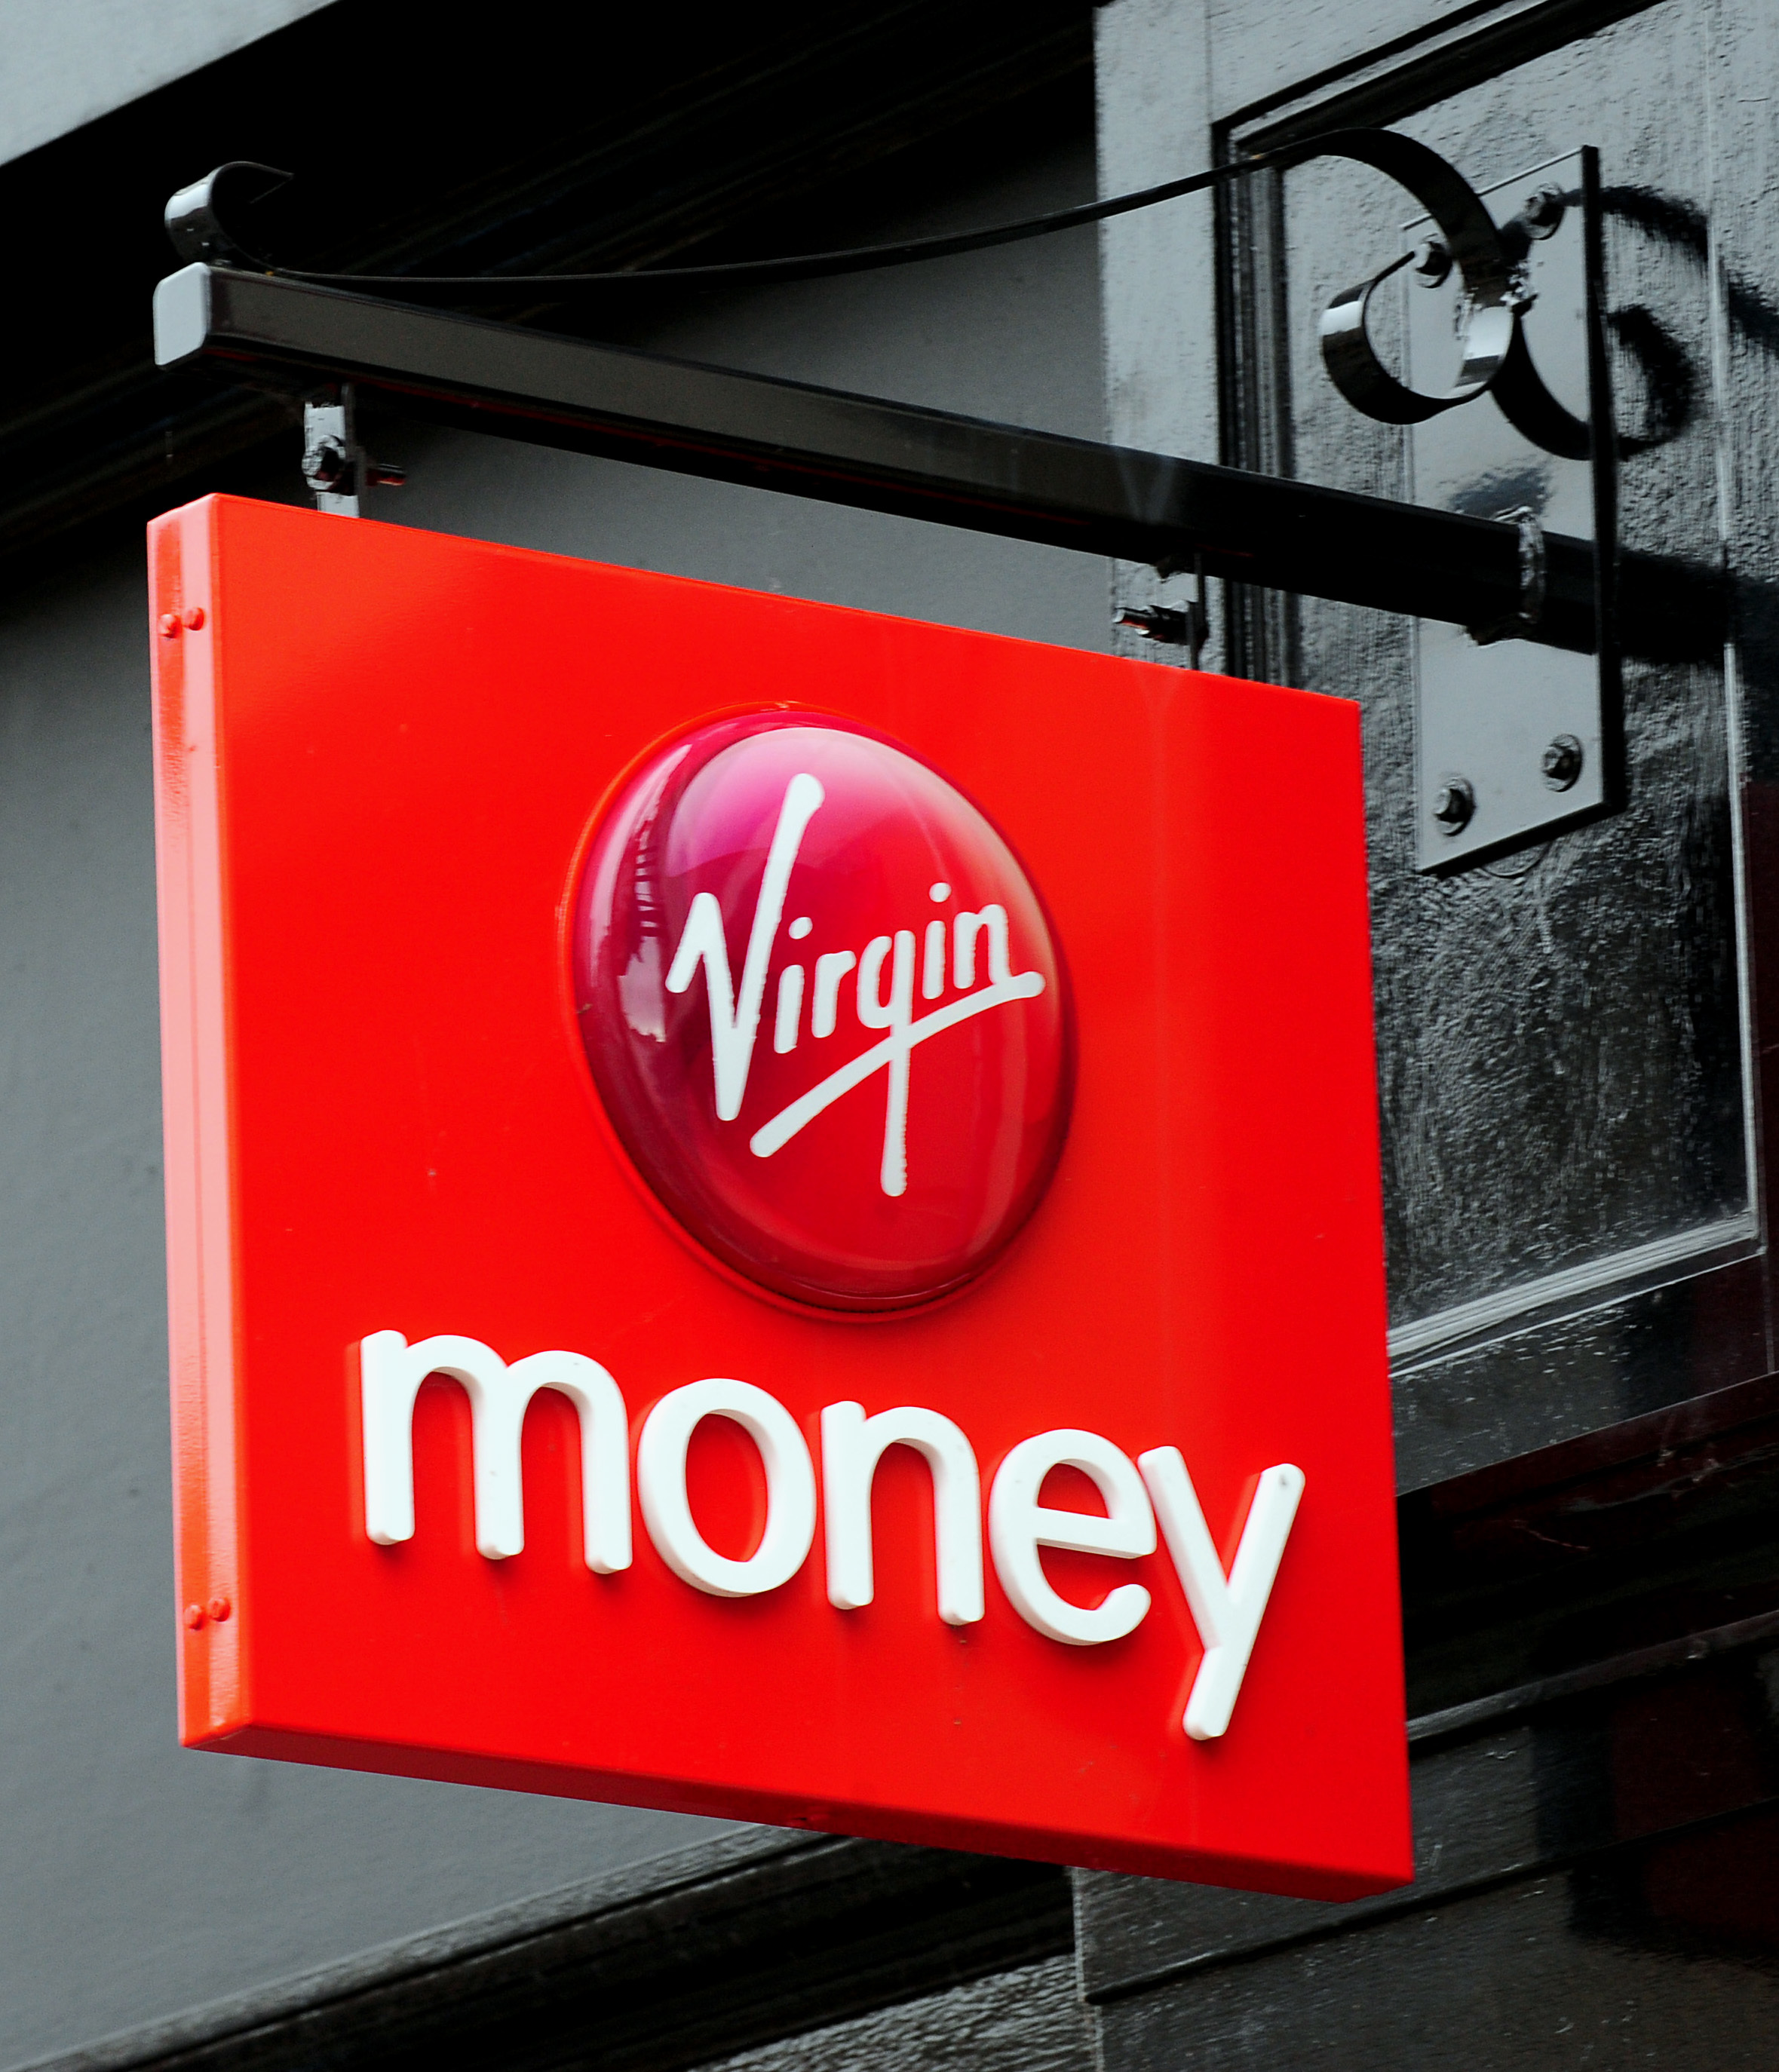 virgin money offers 10% bonus rate for current account switchers